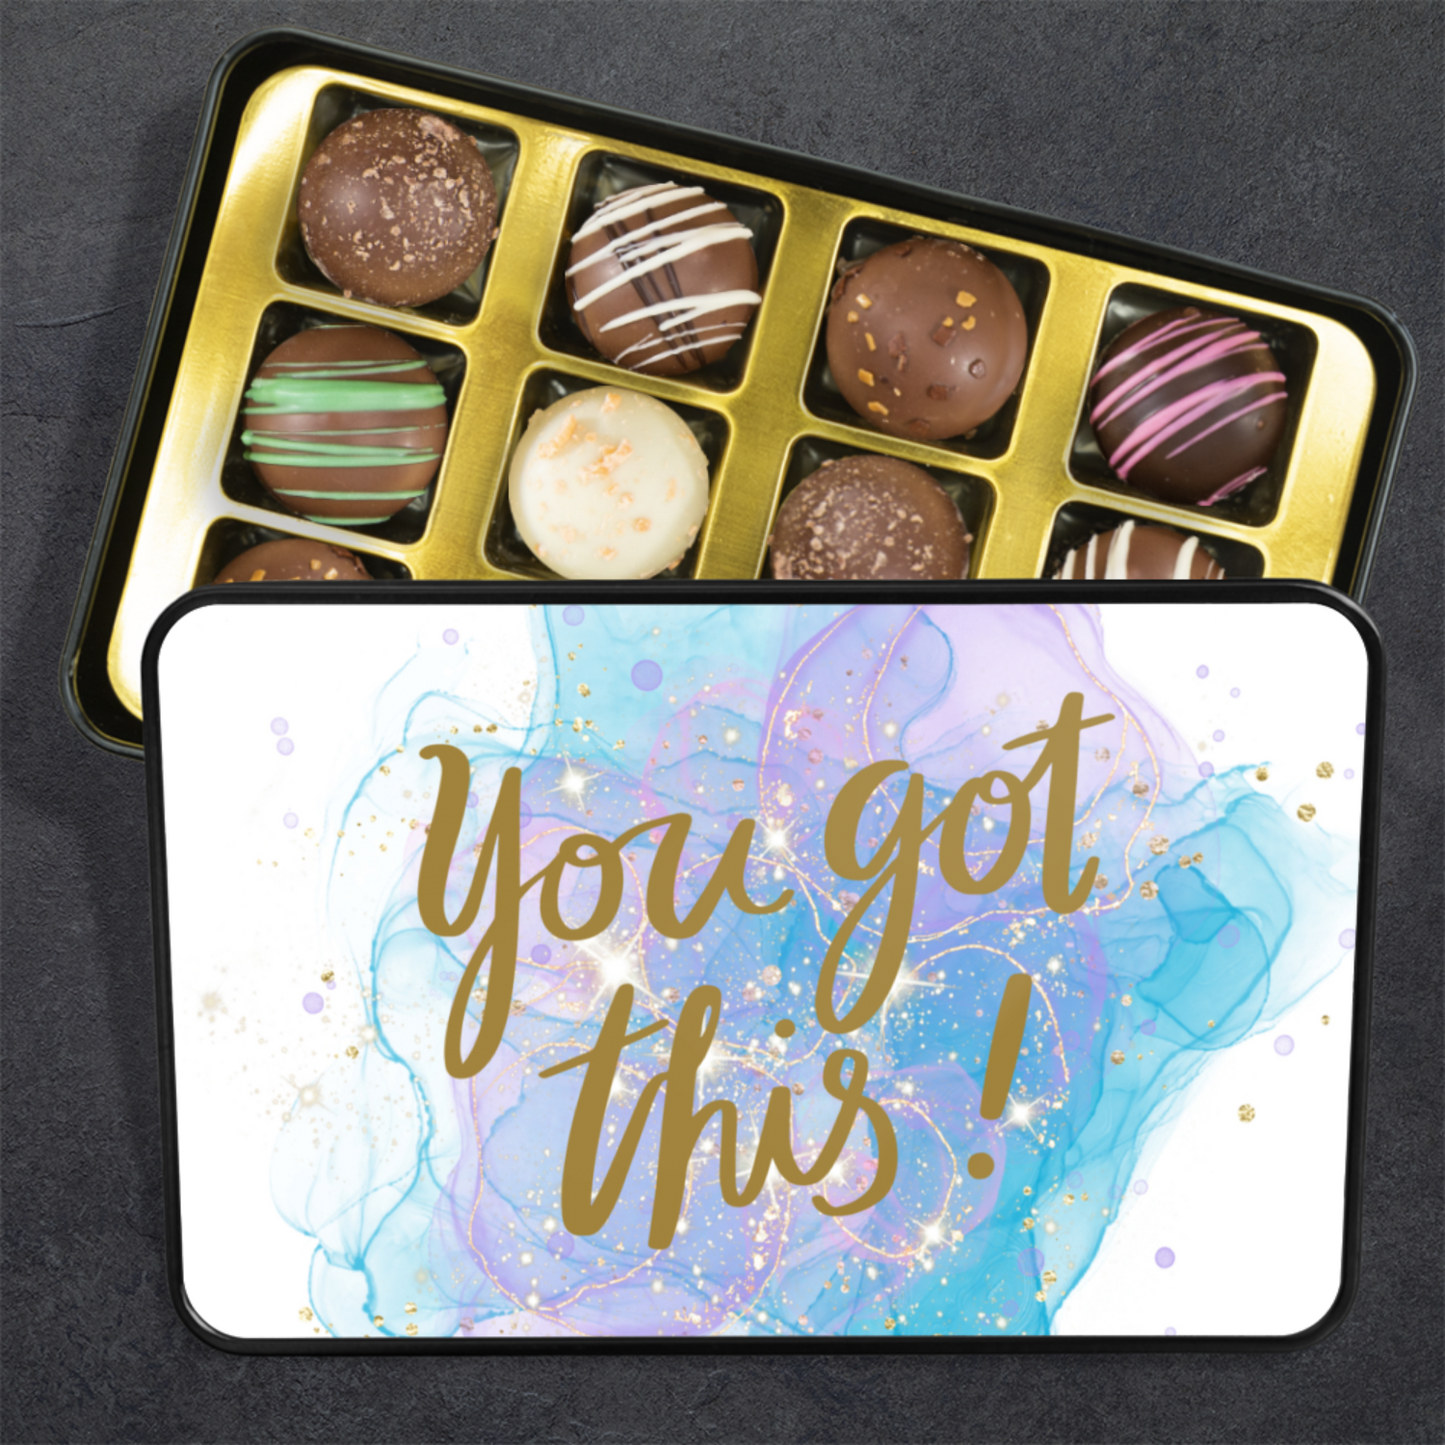 You Got This! Motivational Truffle Box - Assorted Flavors in Vibrant Keepsake Tin